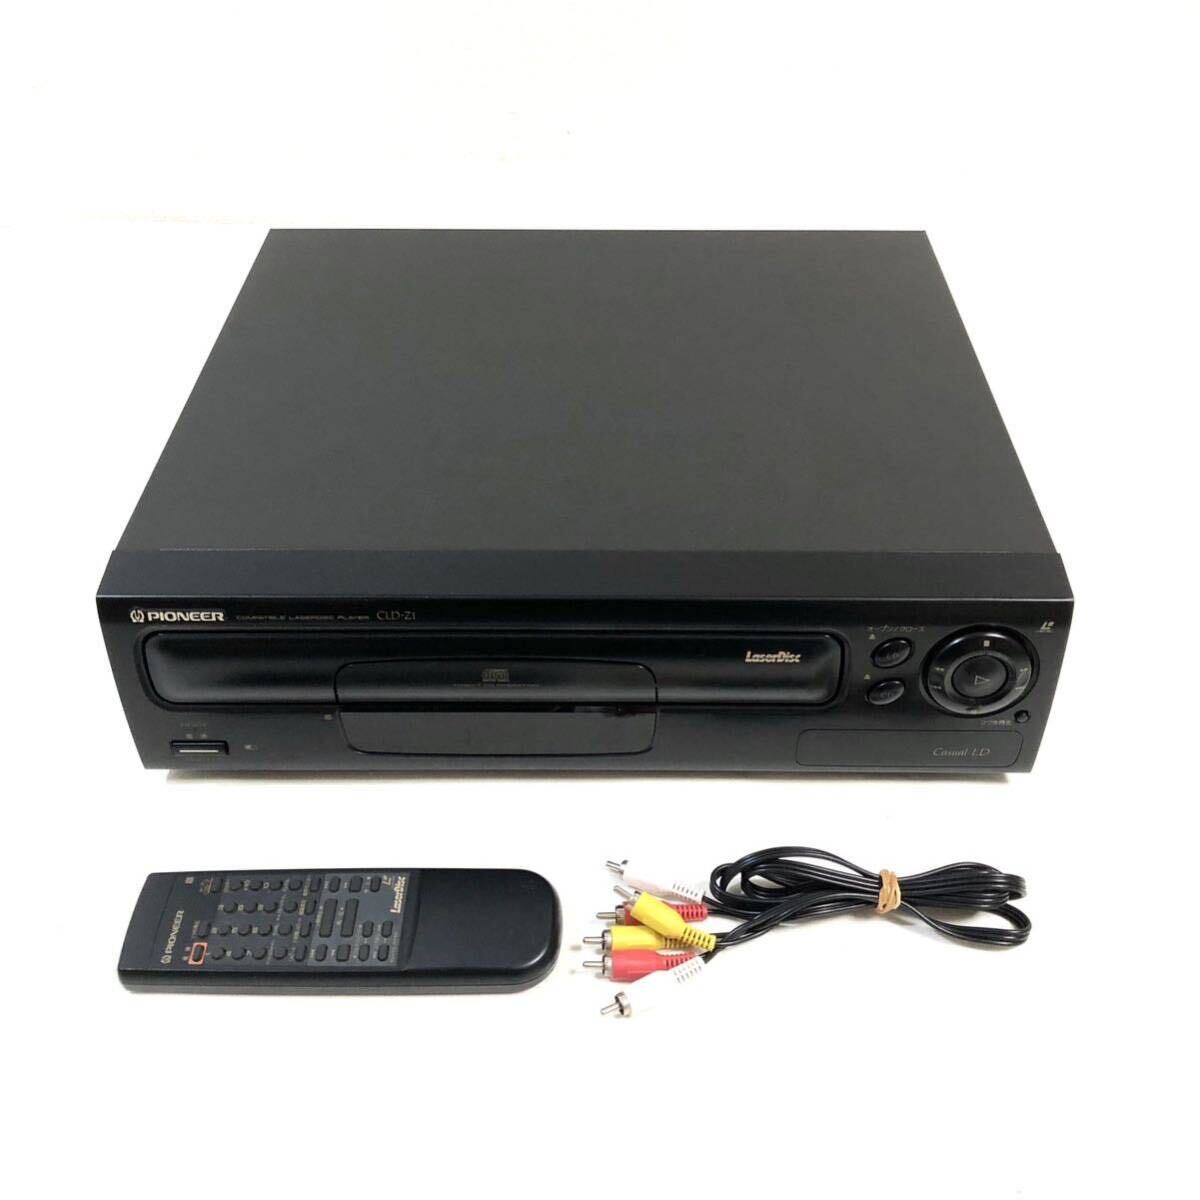  beautiful goods PIONEER Pioneer CLD-Z1 laser disk player original remote control attaching maintenance goods LD player 